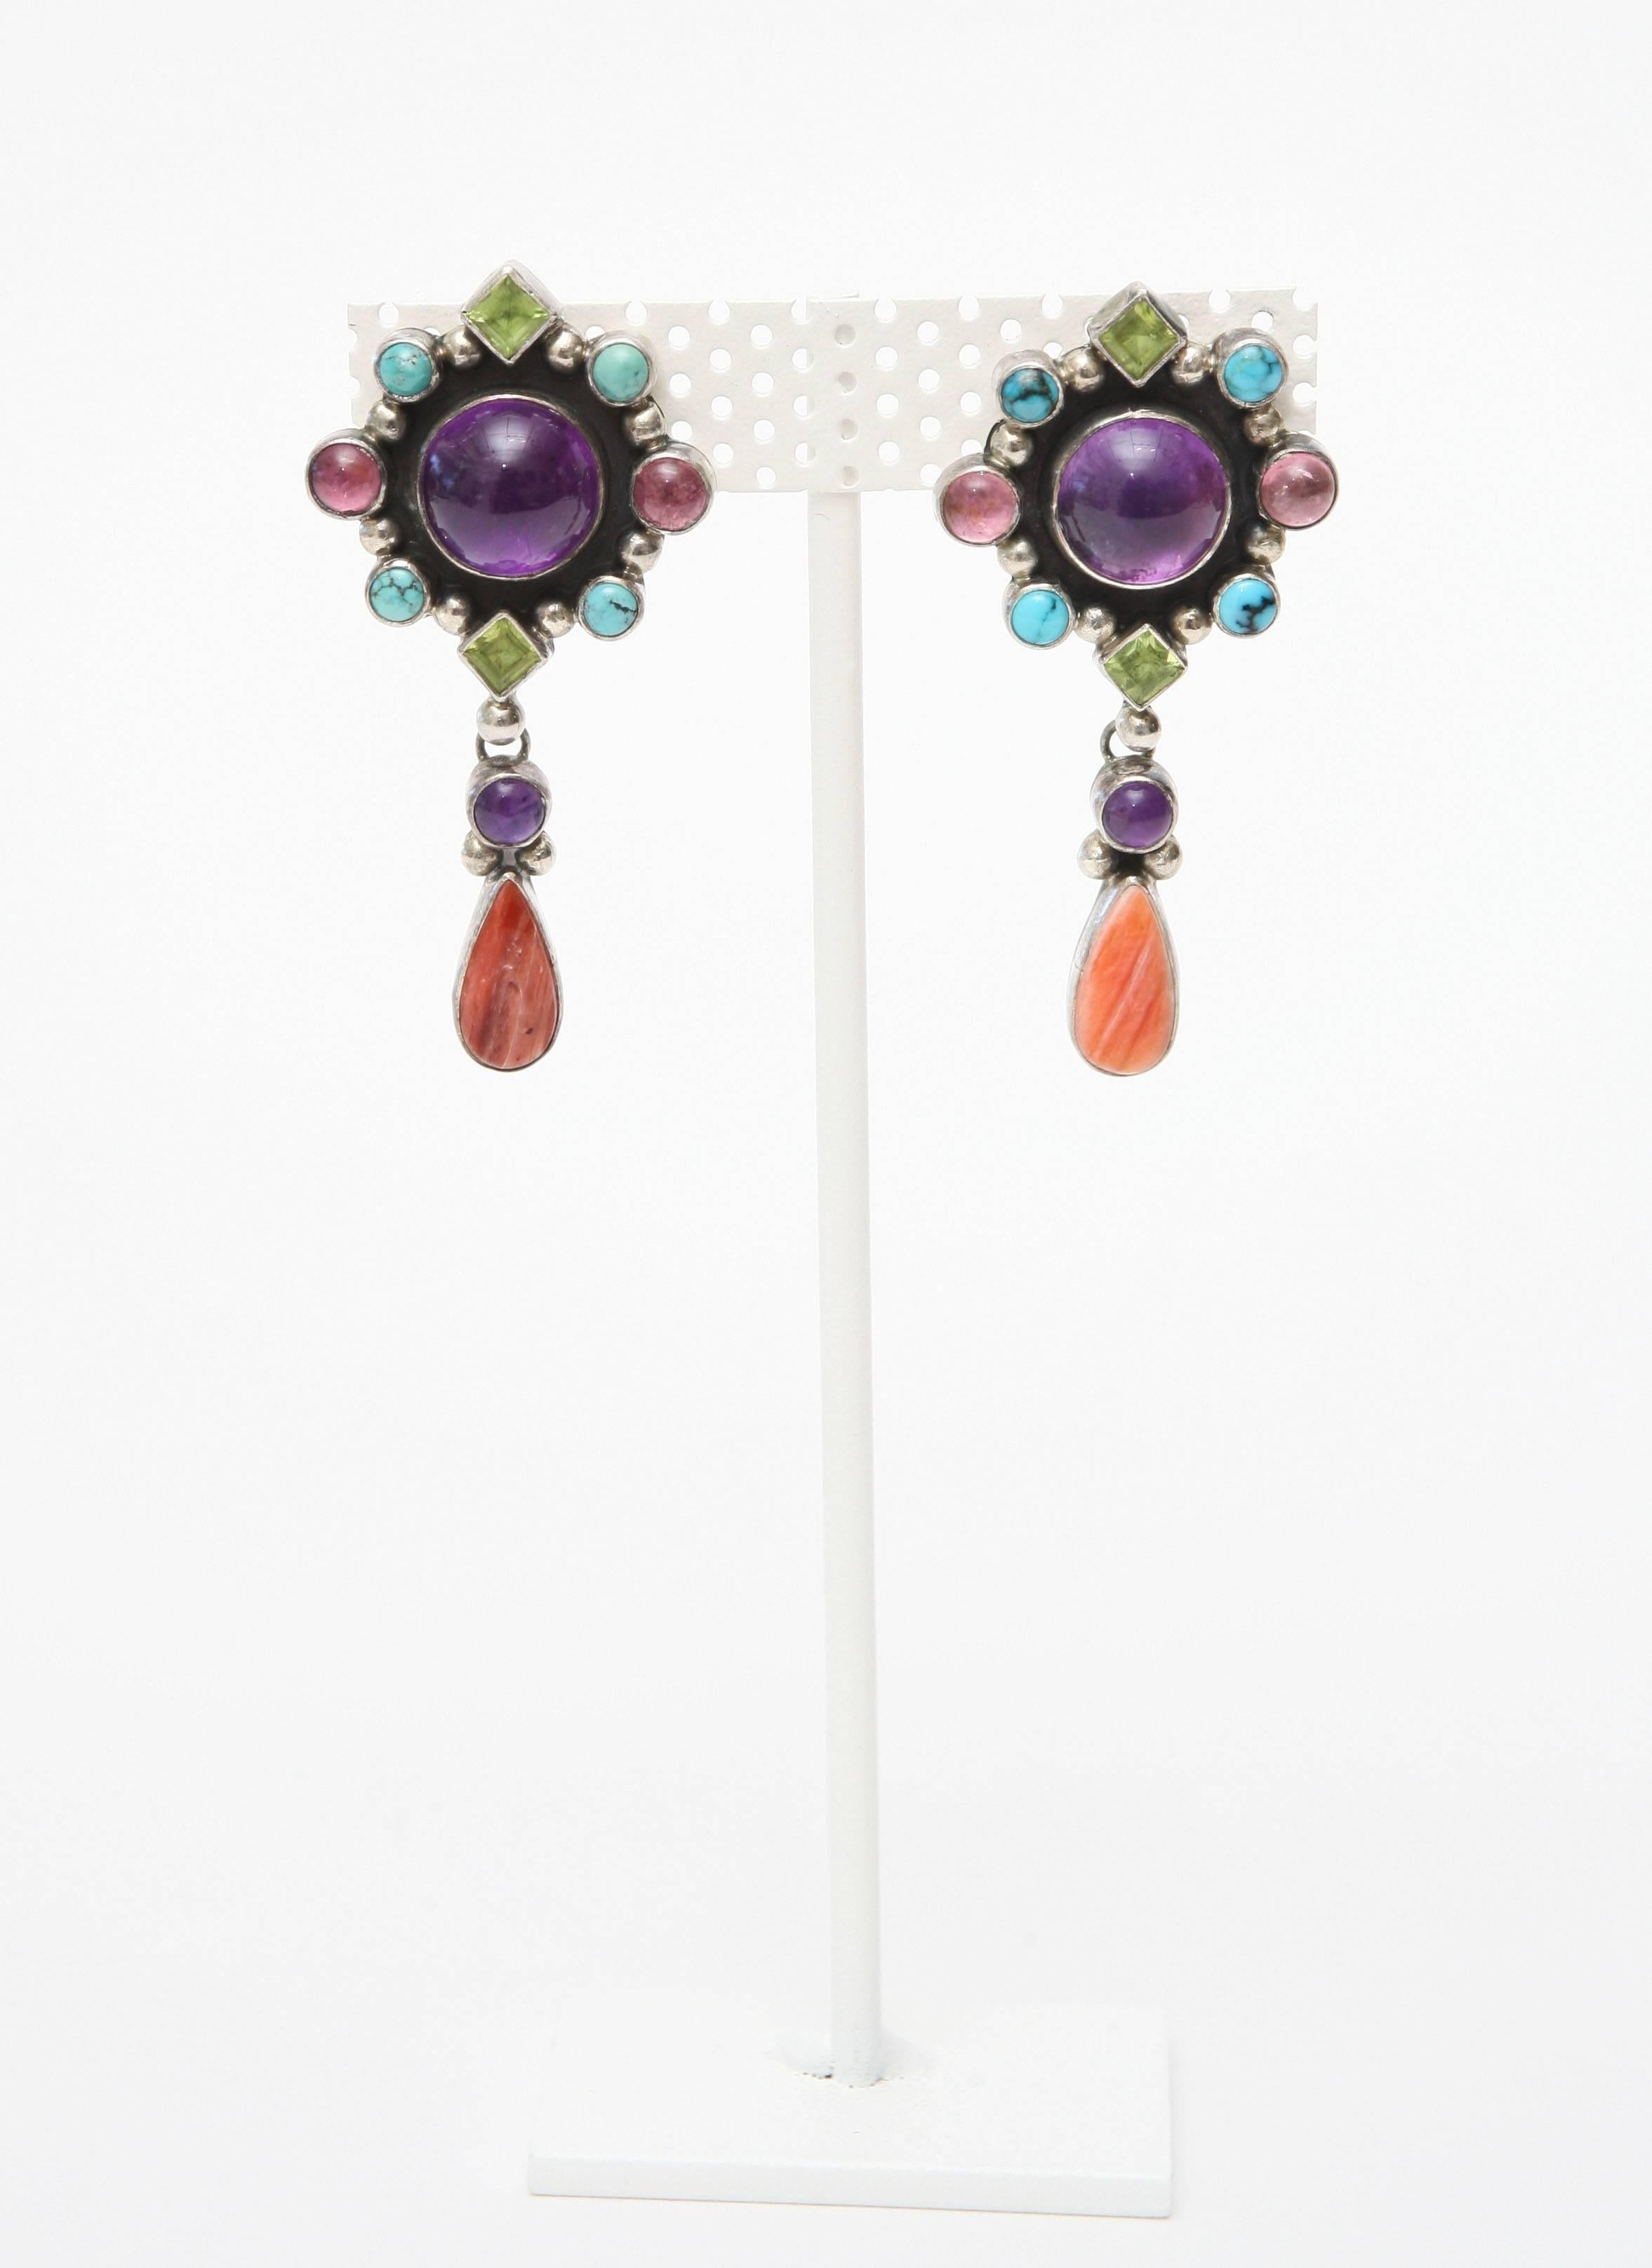 Pair of Coral, Amethyst, Turquoise, Citrine and Sterling Silver Earrings 1